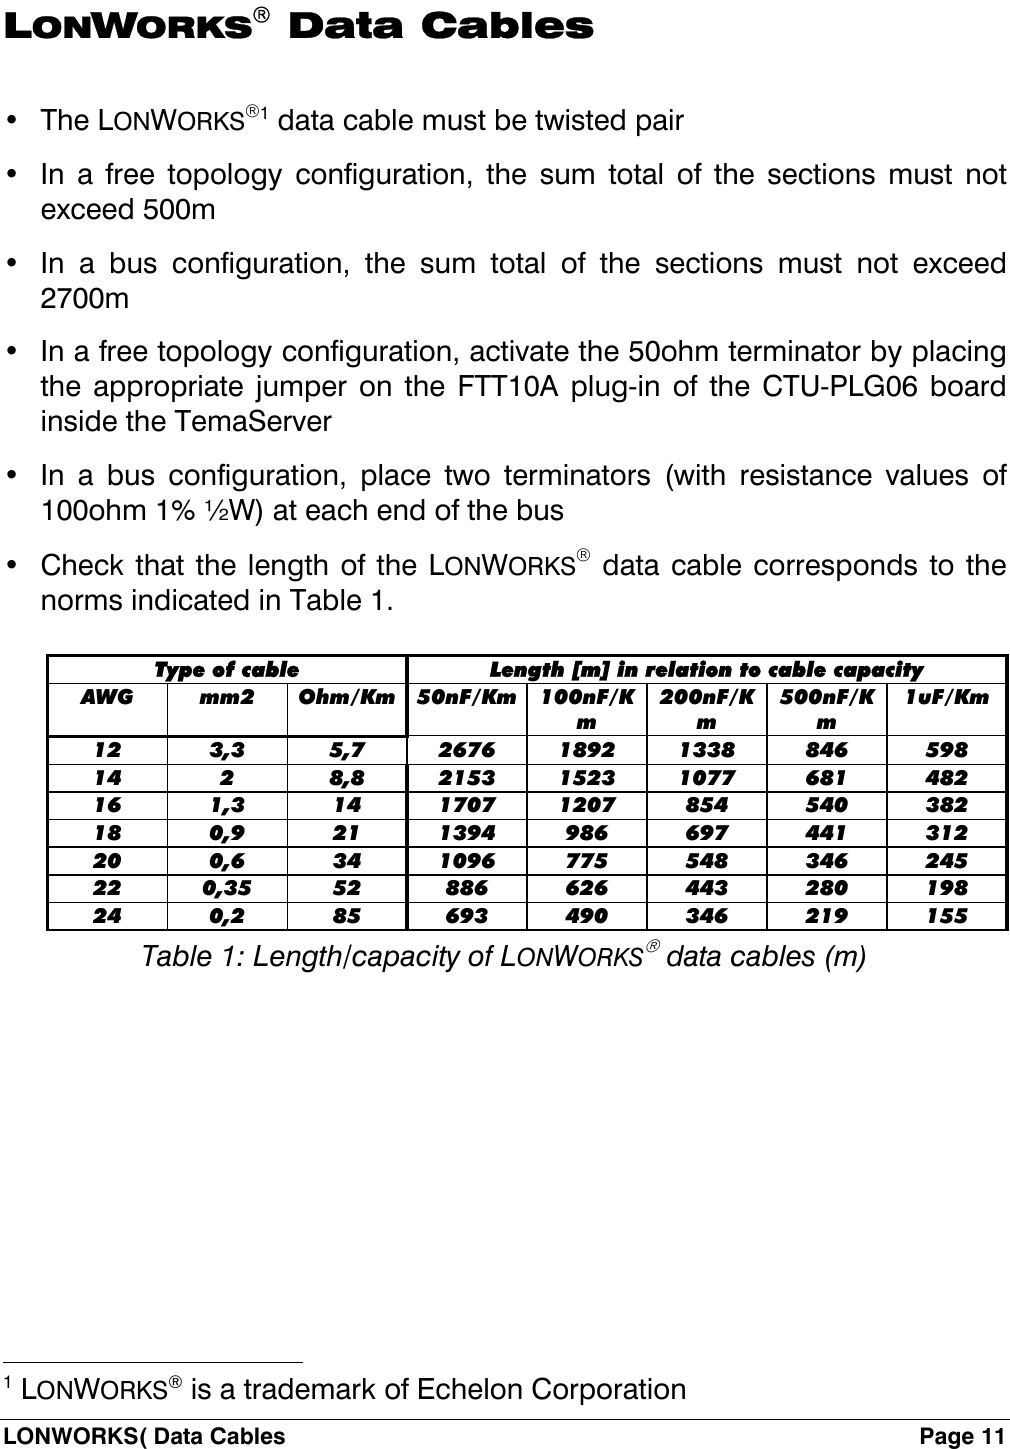 LONWORKS( Data Cables  Page 11    LONWORKS Data Cables  •  The LONWORKS1 data cable must be twisted pair •  In a free topology configuration, the sum total of the sections must not exceed 500m •  In a bus configuration, the sum total of the sections must not exceed 2700m •  In a free topology configuration, activate the 50ohm terminator by placing the appropriate jumper on the FTT10A plug-in of the CTU-PLG06 board inside the TemaServer •  In a bus configuration, place two terminators (with resistance values of 100ohm 1% ½W) at each end of the bus •  Check that the length of the LONWORKS data cable corresponds to the norms indicated in Table 1.  Type of cable  Length [m] in relation to cable capacity AWG mm2 Ohm/Km 50nF/Km 100nF/Km 200nF/Km 500nF/Km 1uF/Km 12 3,3 5,7 2676 1892 1338 846 598 14 2 8,8 2153 1523 1077 681 482 16 1,3 14 1707 1207 854 540 382 18 0,9 21 1394 986 697 441 312 20 0,6 34 1096 775 548 346 245 22 0,35 52  886 626 443 280 198 24 0,2 85 693 490 346 219 155 Table 1: Length/capacity of LONWORKS data cables (m)                                                            1 LONWORKS® is a trademark of Echelon Corporation 